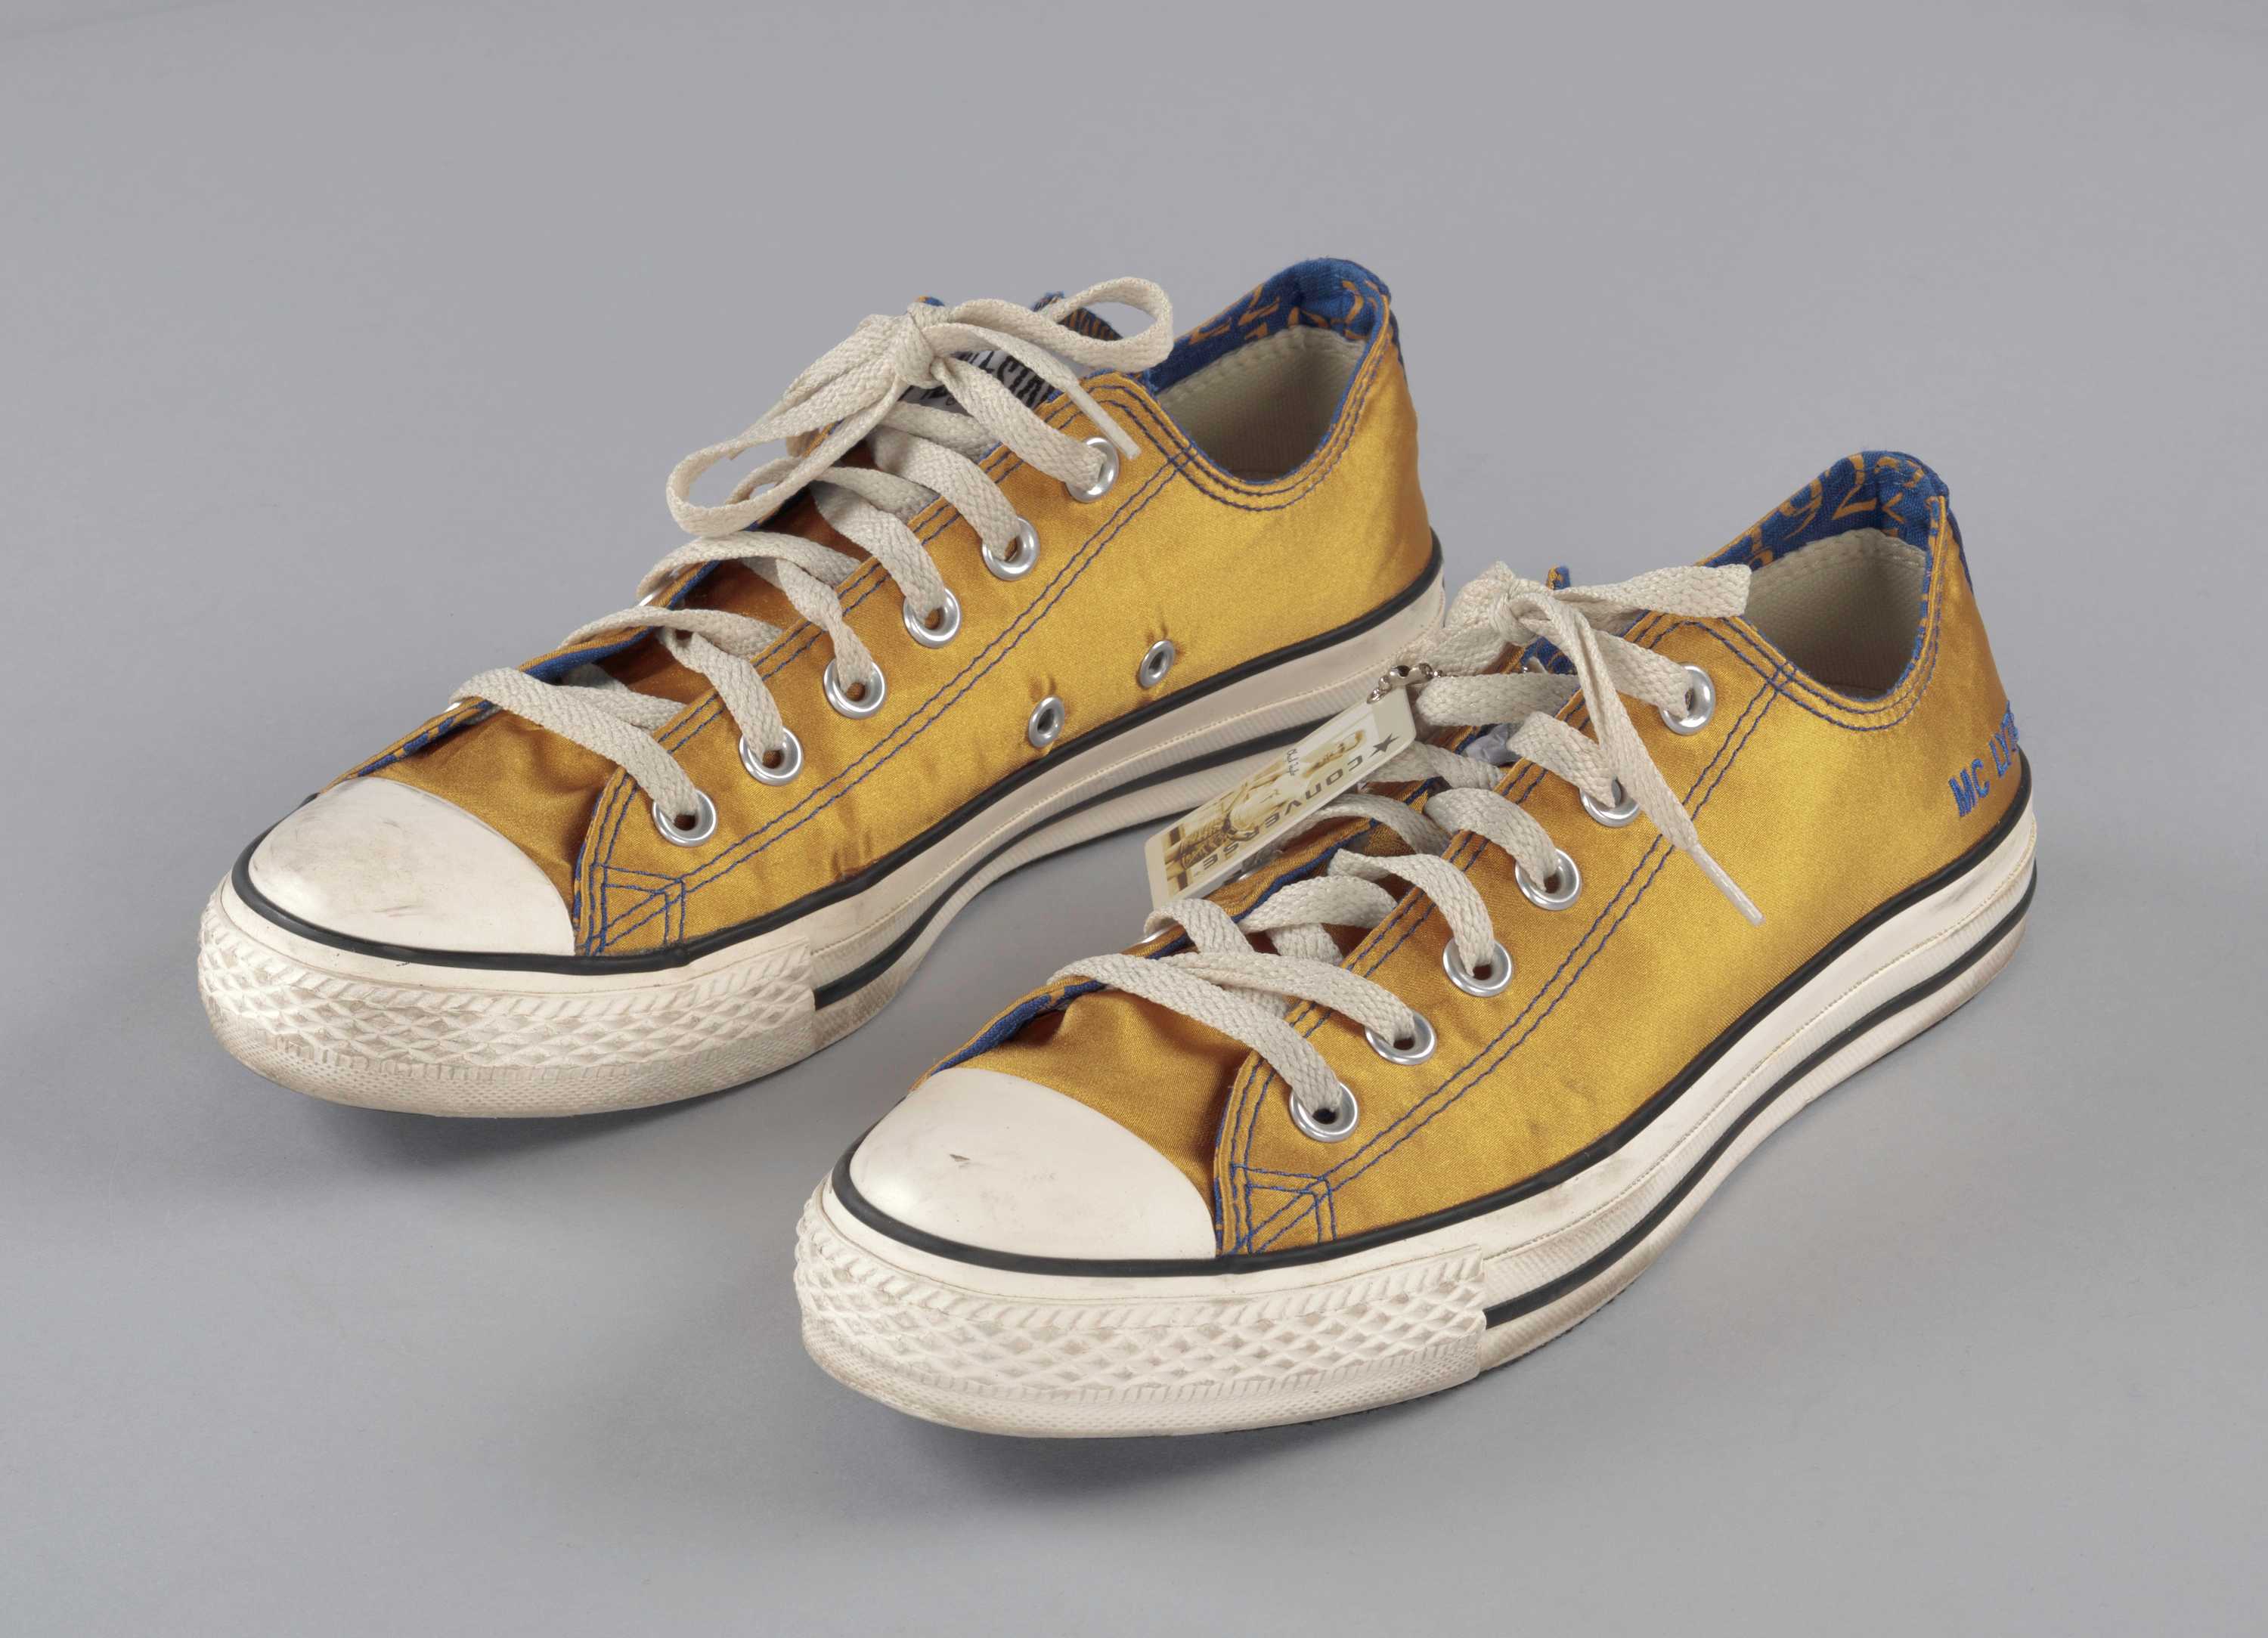 A pair of gold and blue satin Converse sneakers customized for Sigma Gamma Rho sorority member MC Lyte.